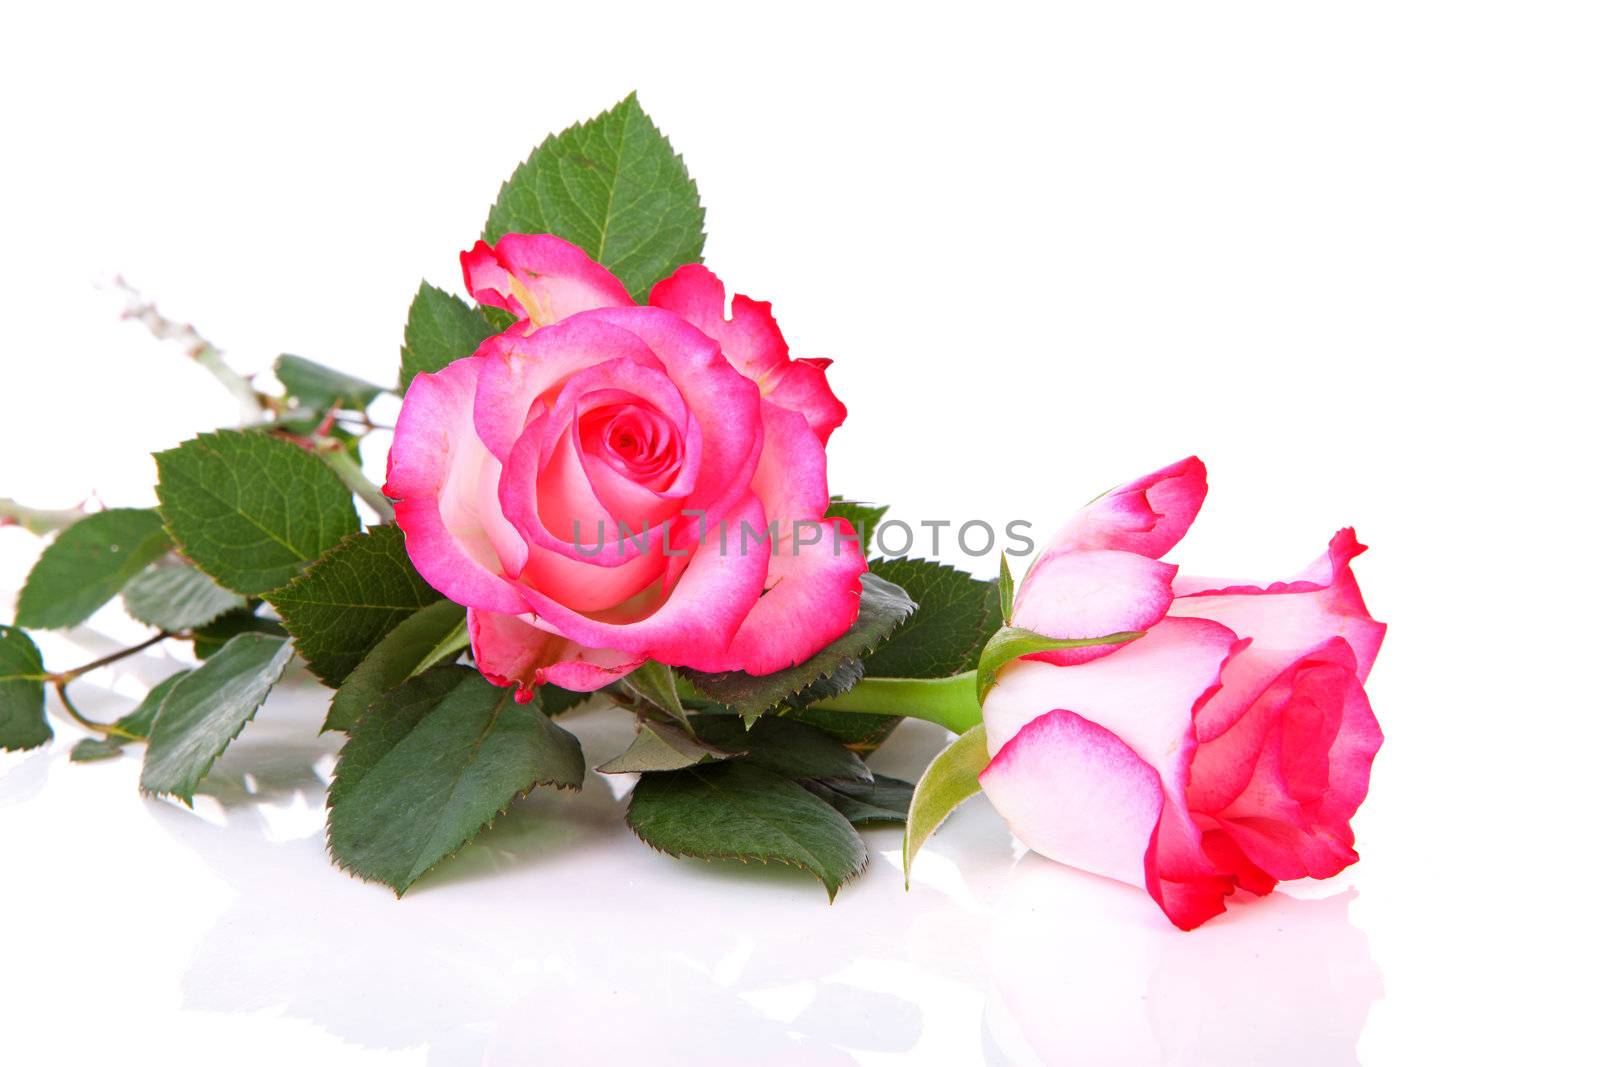 Two beautiful pink roses over white background